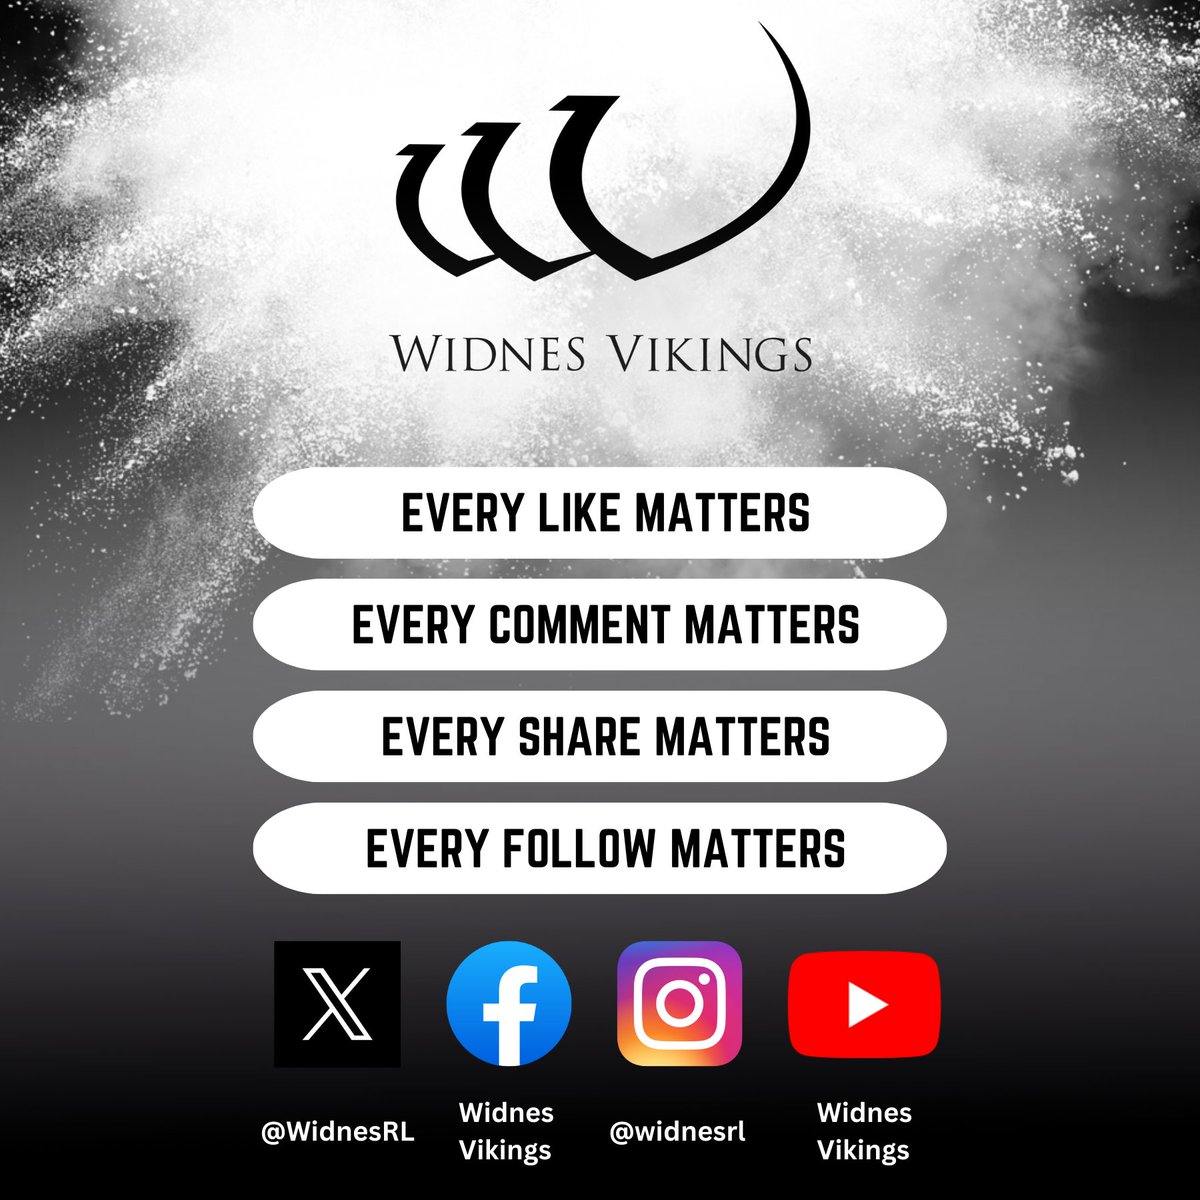 🙌 YOU CAN MAKE THE DIFFERENCE By following us on all platforms, liking, sharing, and commenting on our posts, you can make a big impact in the IMG era! ⚪️⚫️ #COYV 🧪 #WeAreWidnes